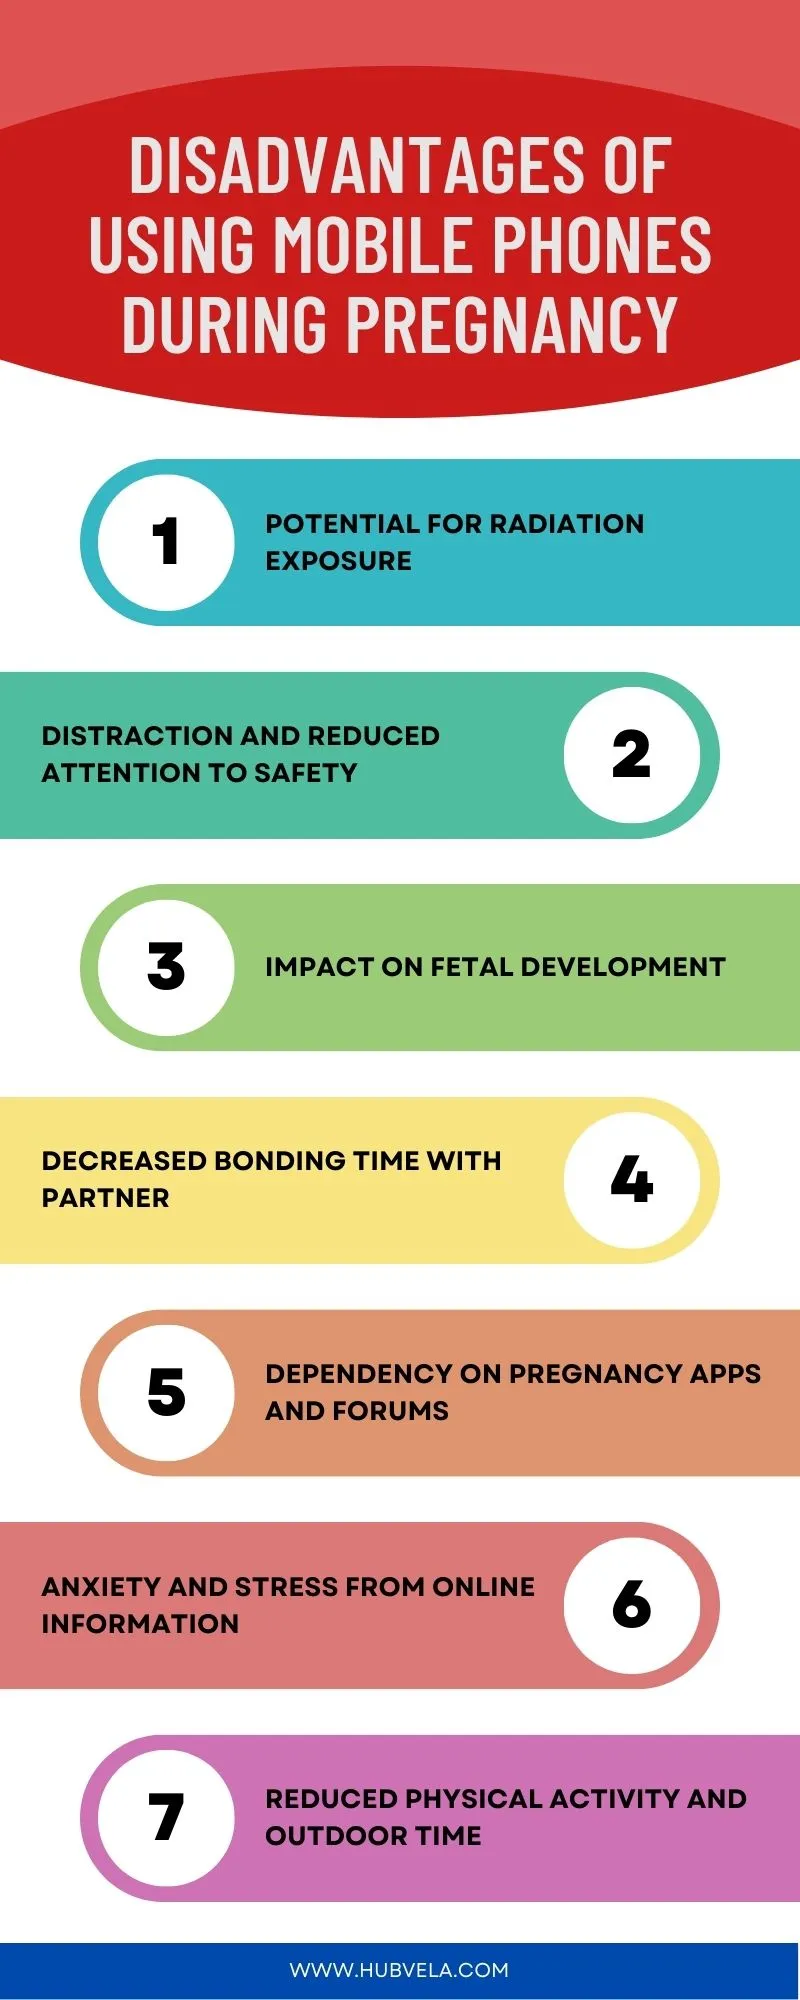 Disadvantages of Using Mobile Phones During Pregnancy Infographic